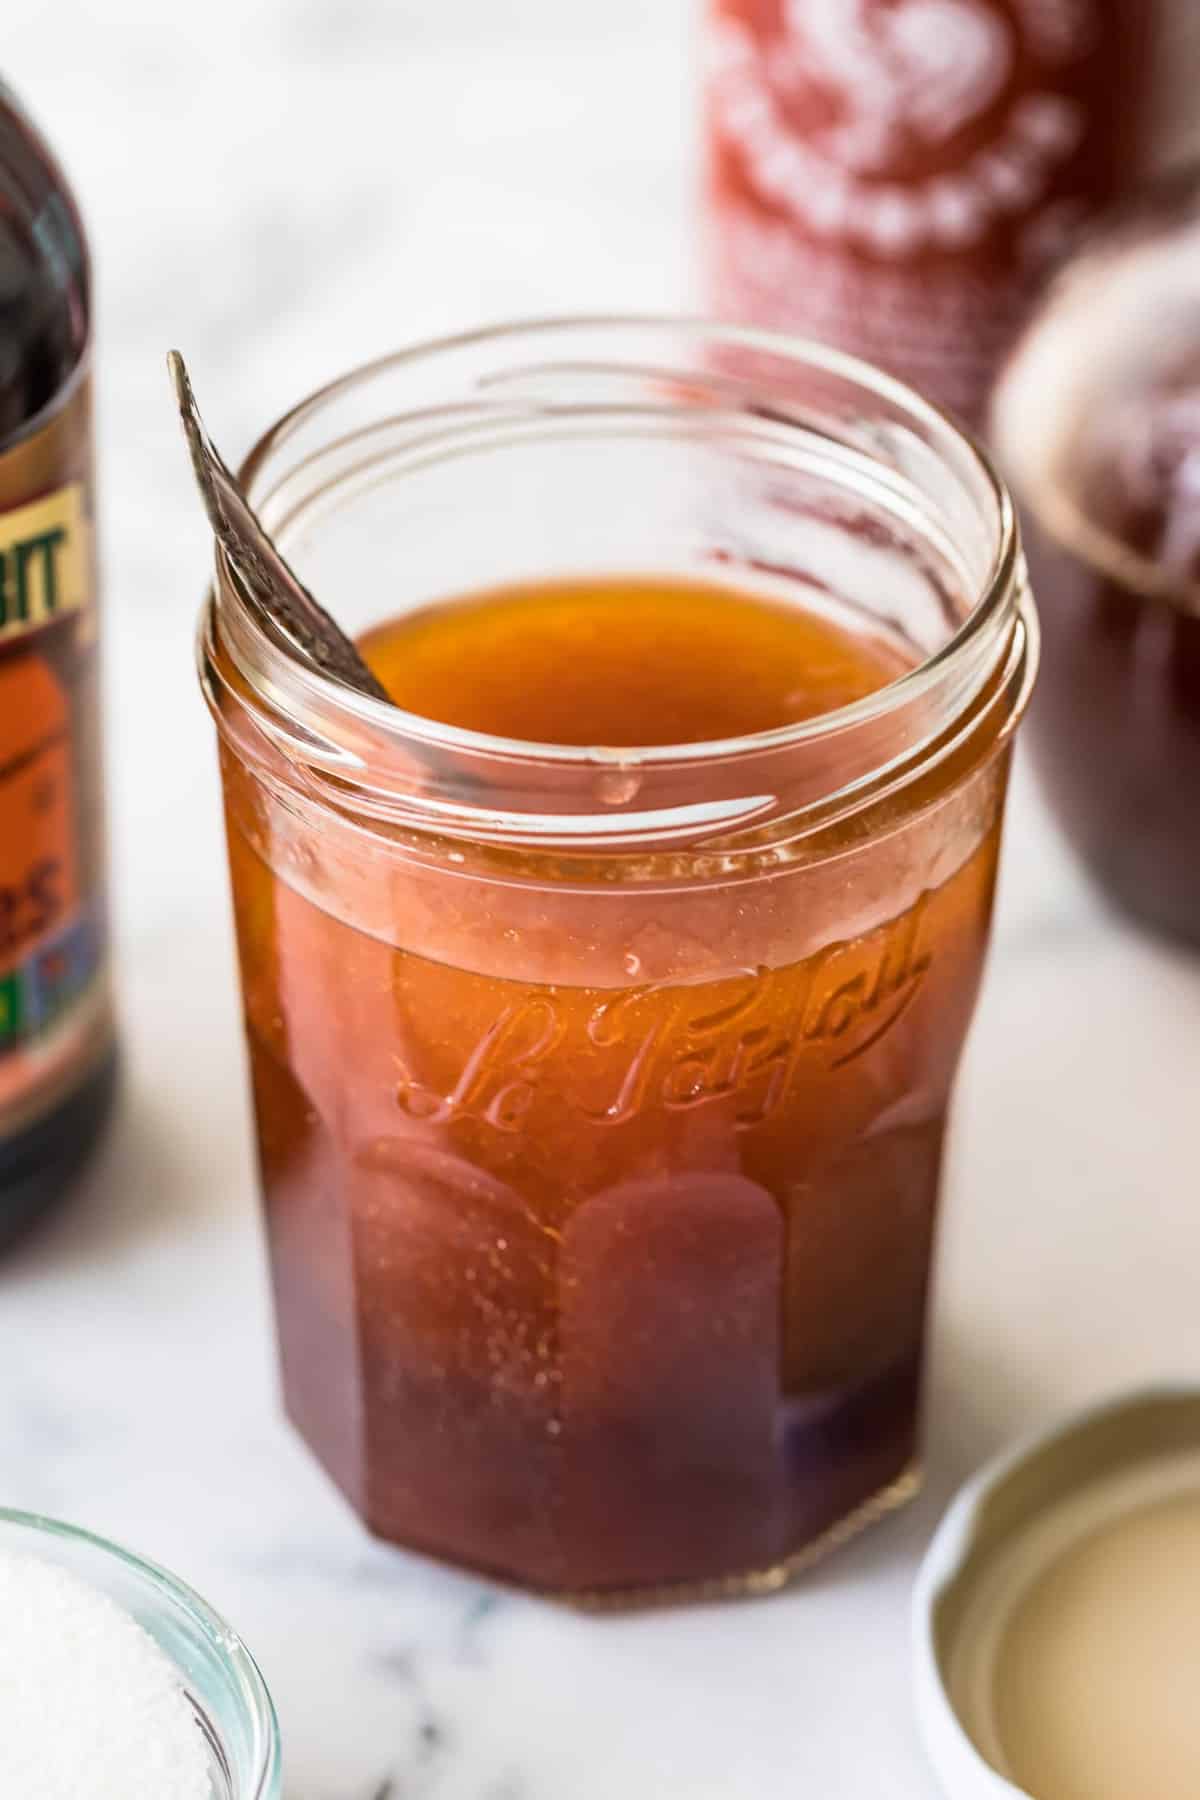 Spicy Sweet Salad Dressing in a jar with a spoon ready to serve